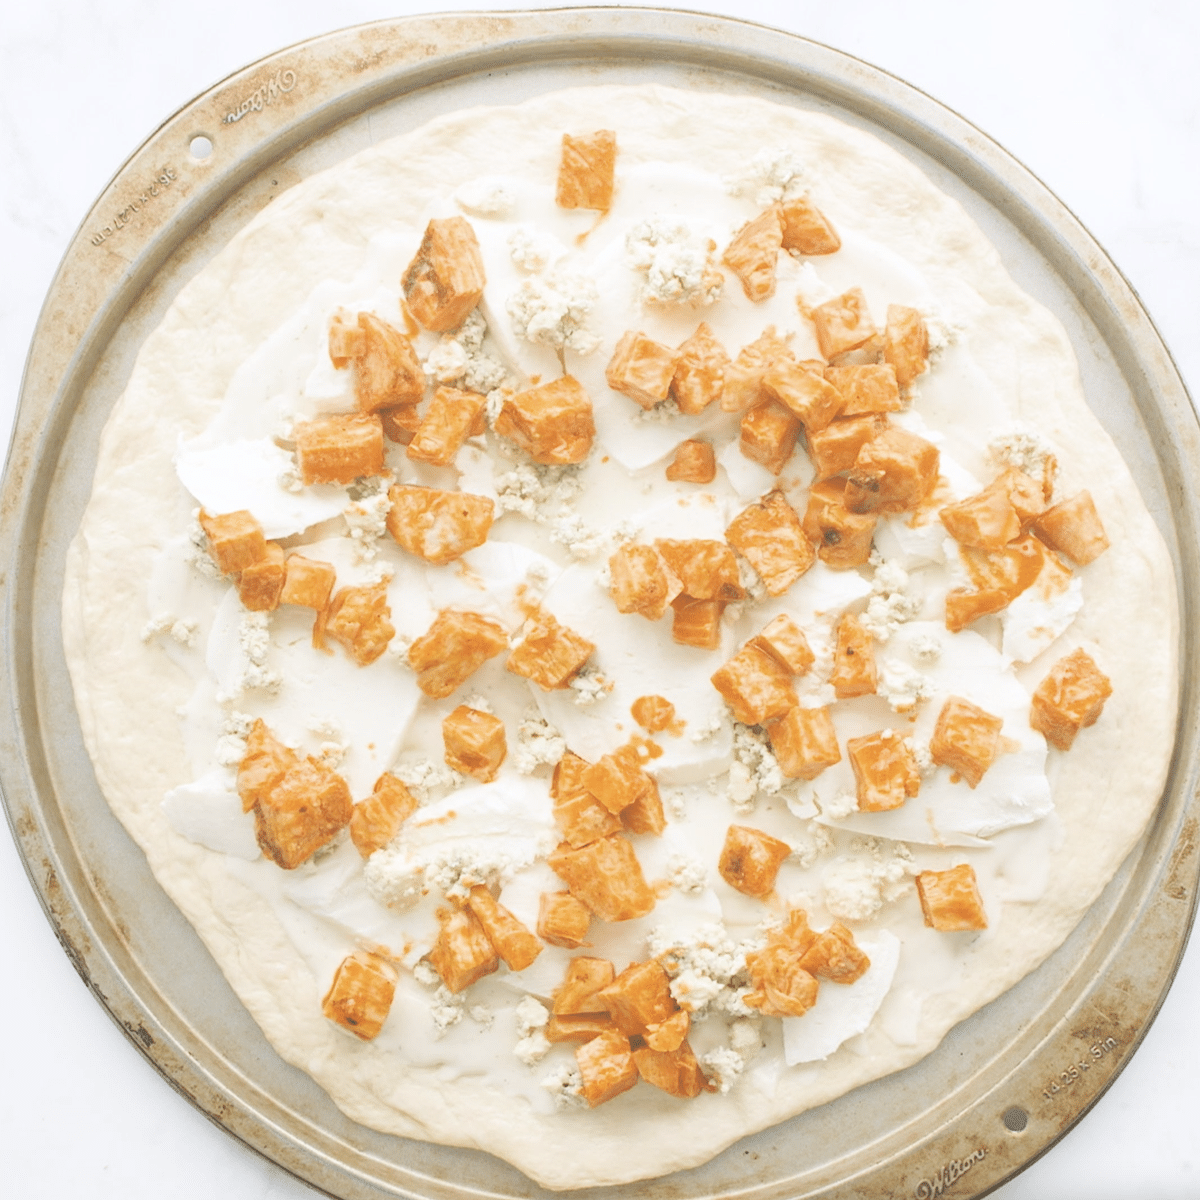 Raw pizza dough topped with buffalo chicken on a pizza stone.